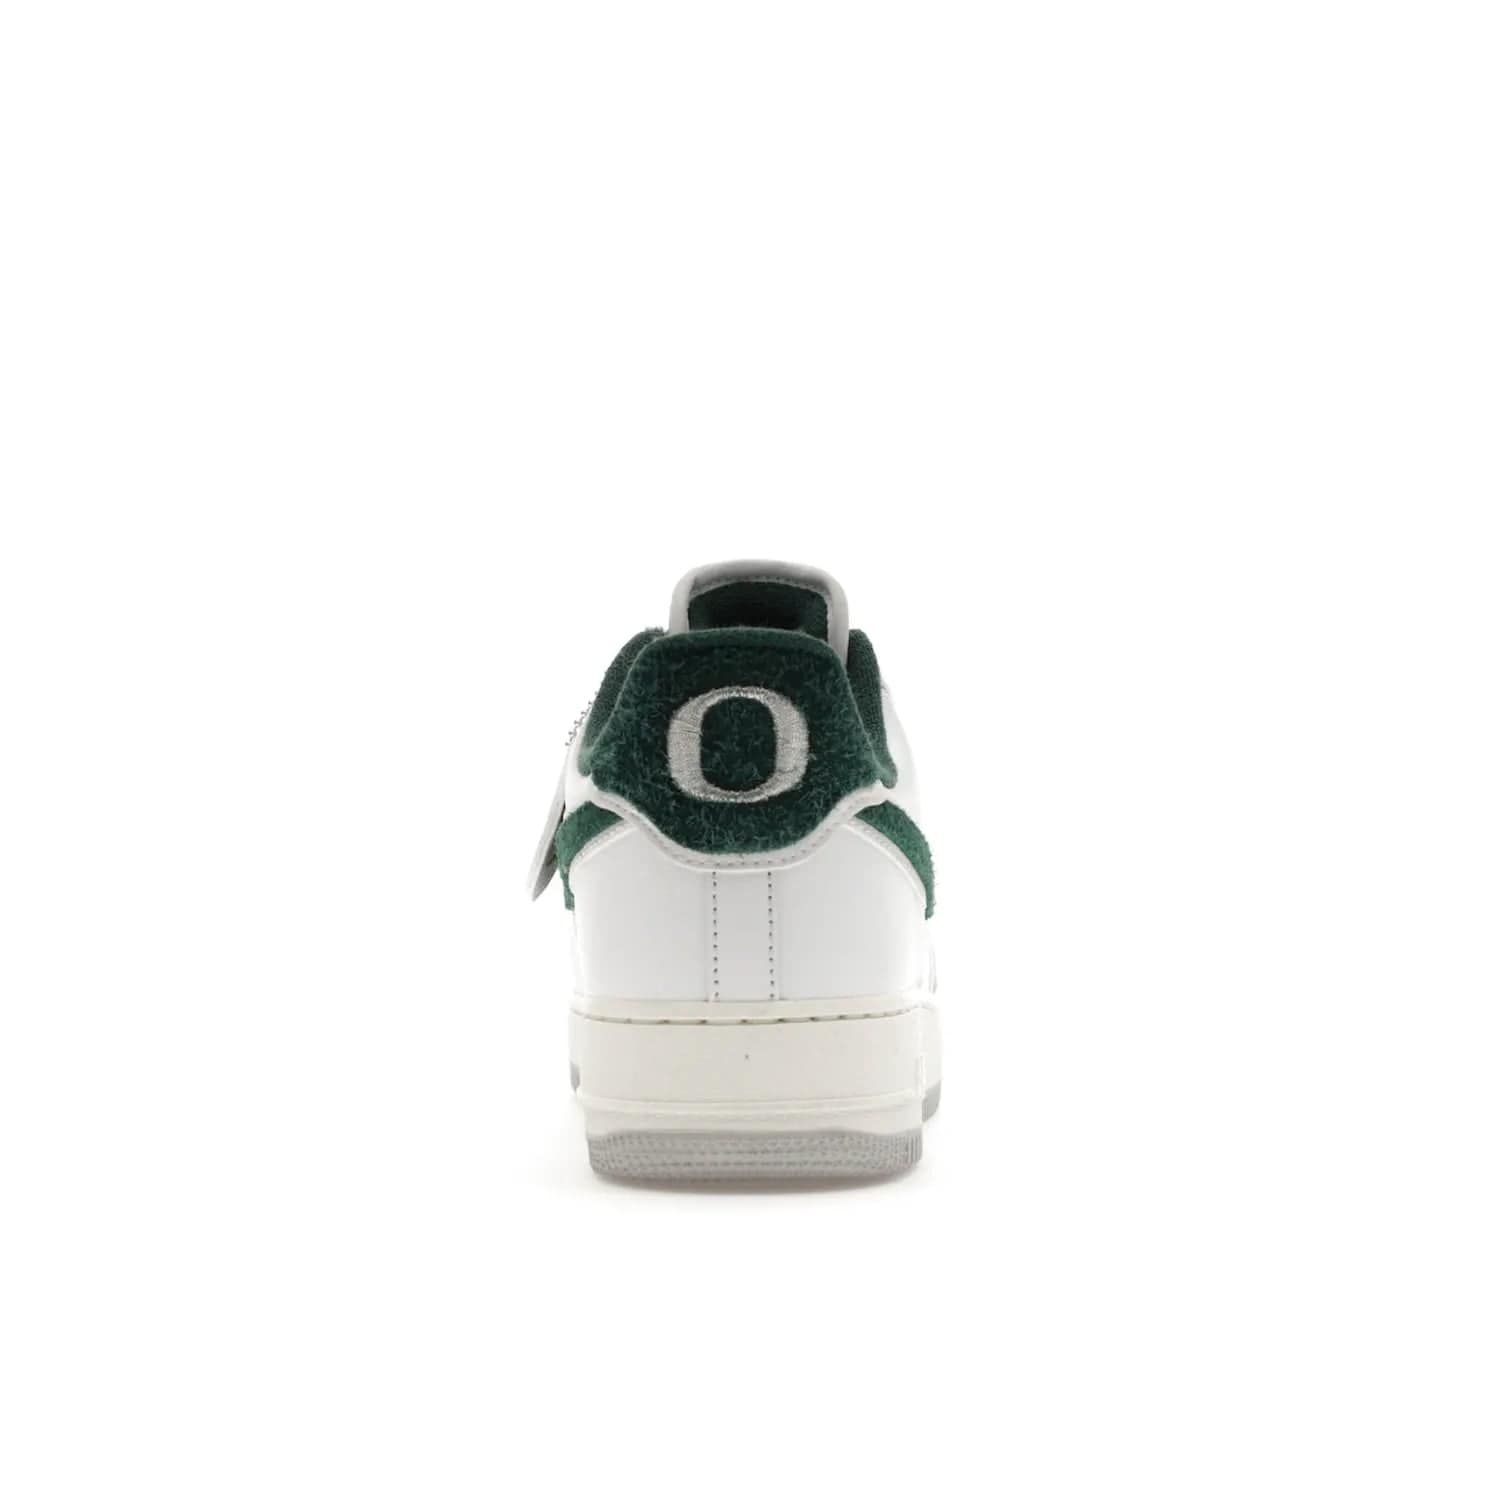 Nike Air Force 1 Low '07 Premium University of Oregon PE - Image 28 - Only at www.BallersClubKickz.com - The Nike Air Force 1 Low '07 Premium. Special Oregon University colorway. White base with green and sail accents. Cushioned rubber midsole. Comfort and style. Support your school!